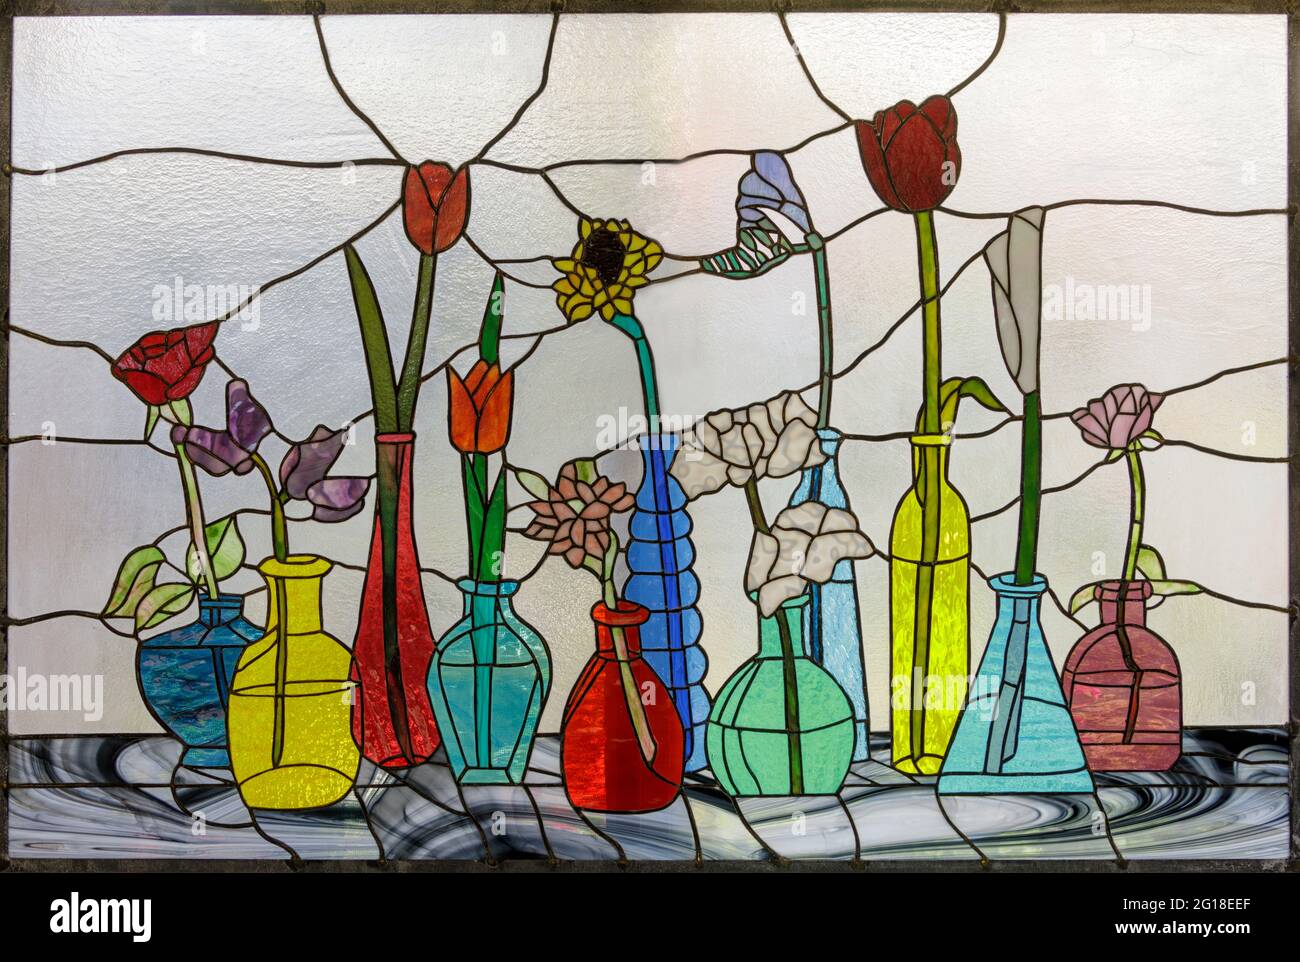 Stained Glass Window Panel of Flowers in Vases Stock Photo